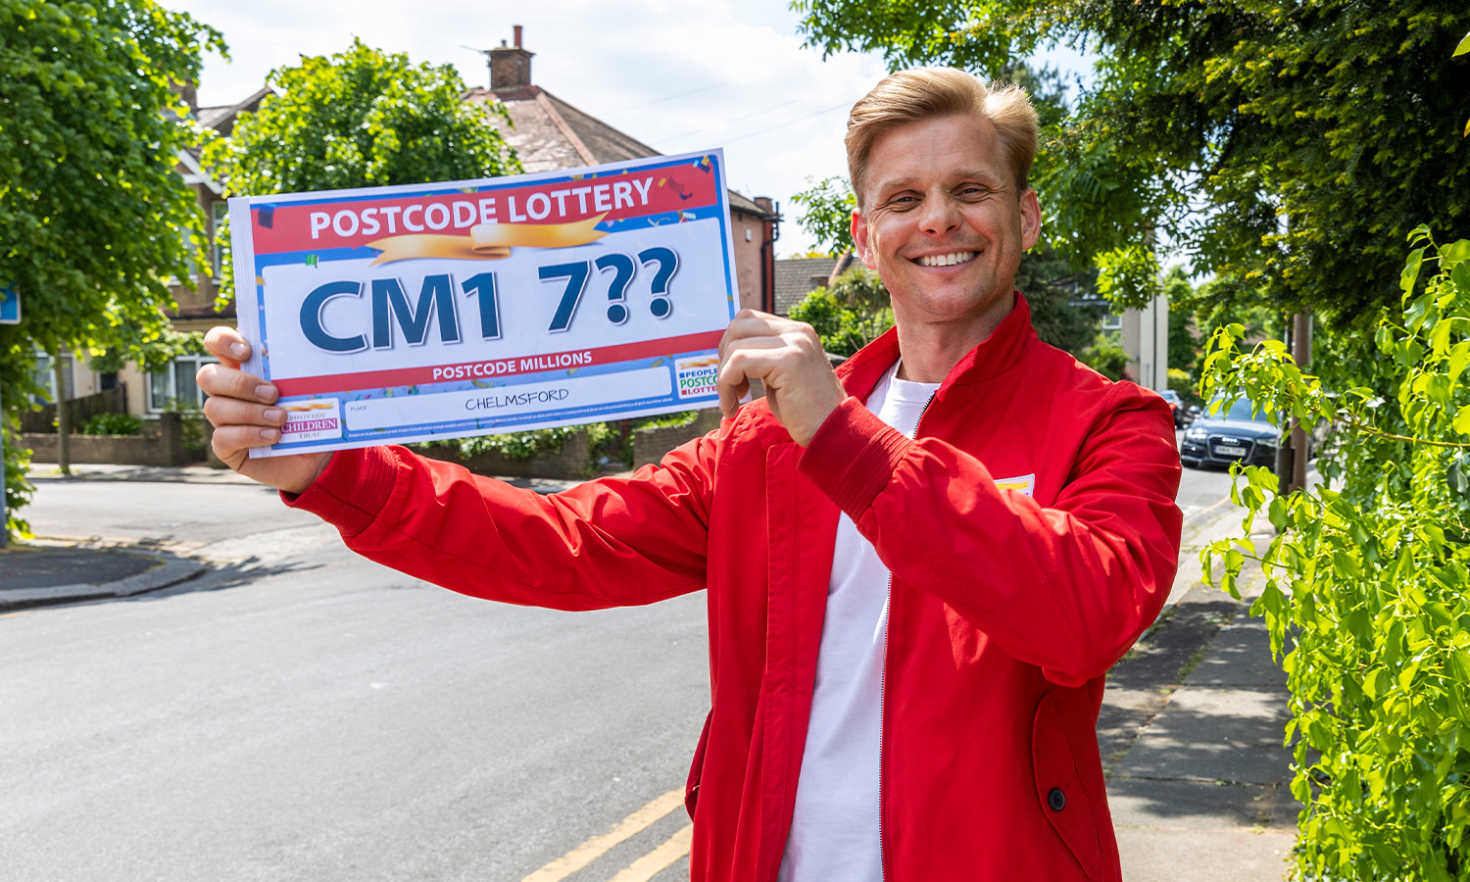 Our latest Postcode Millions has landed in Chelmsford, and players will share £3.2 Million